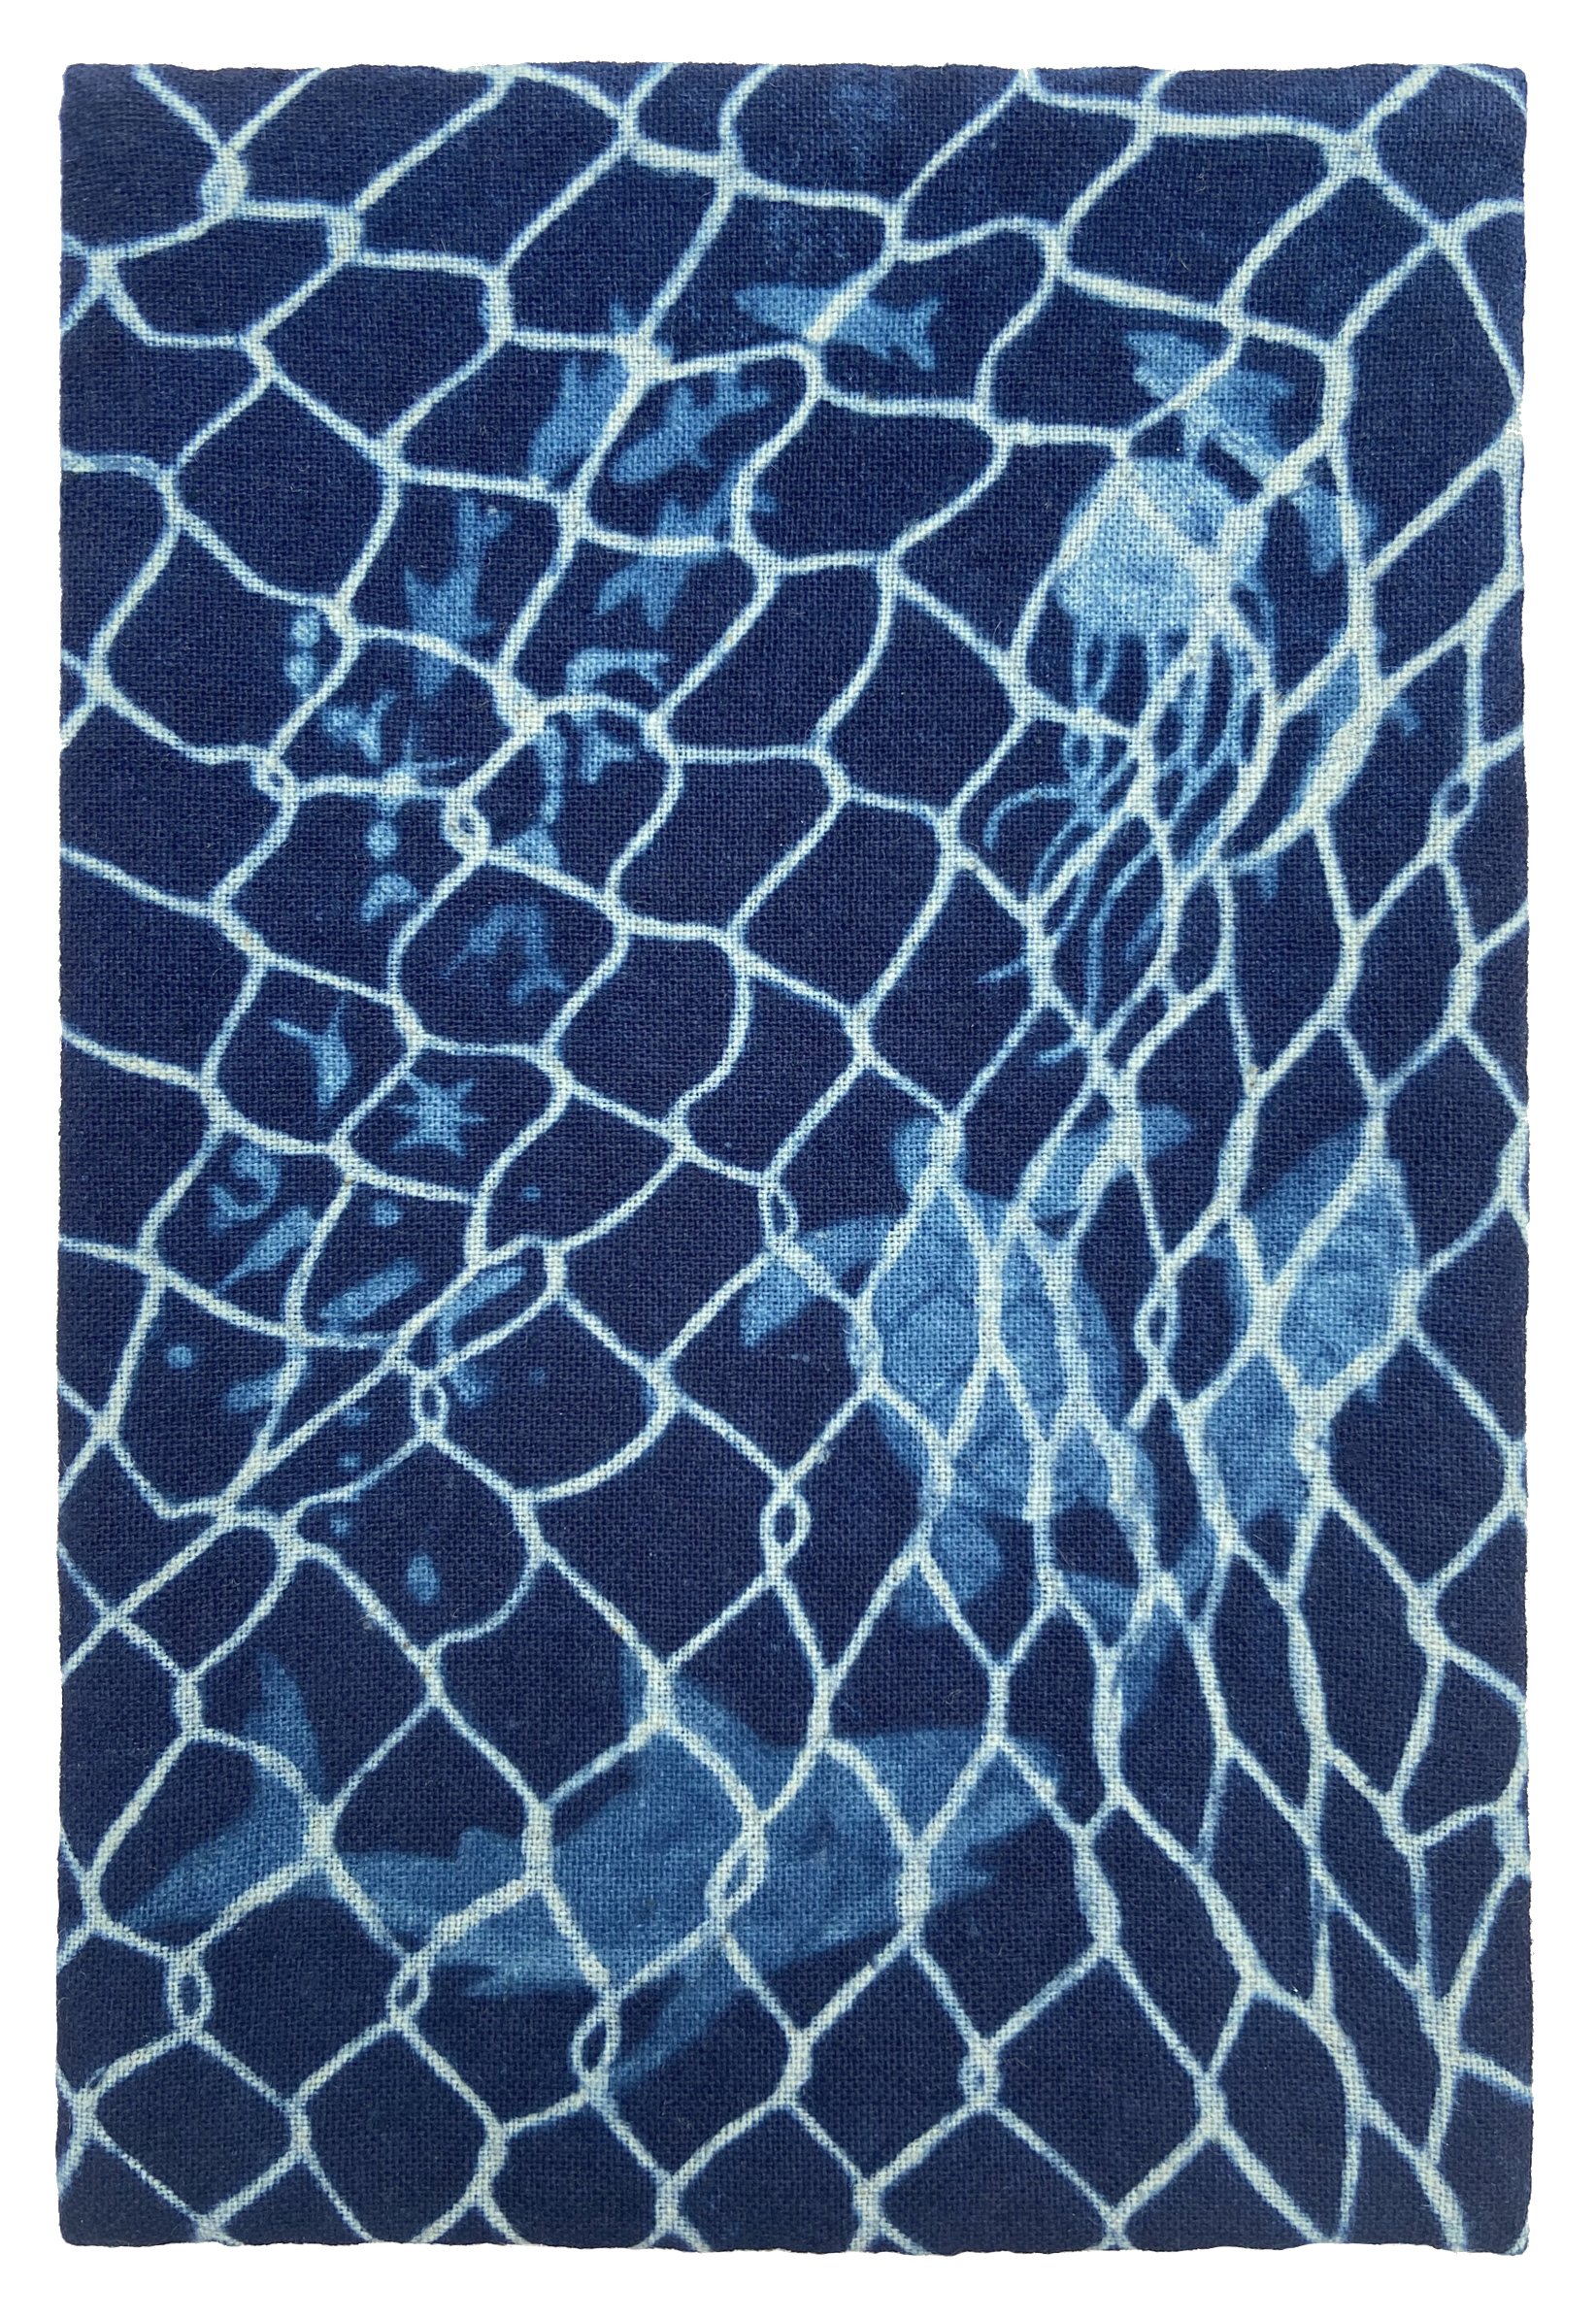 "Fishnet Food Chain," indigo dyed cotton, 6 by 4.25 inches